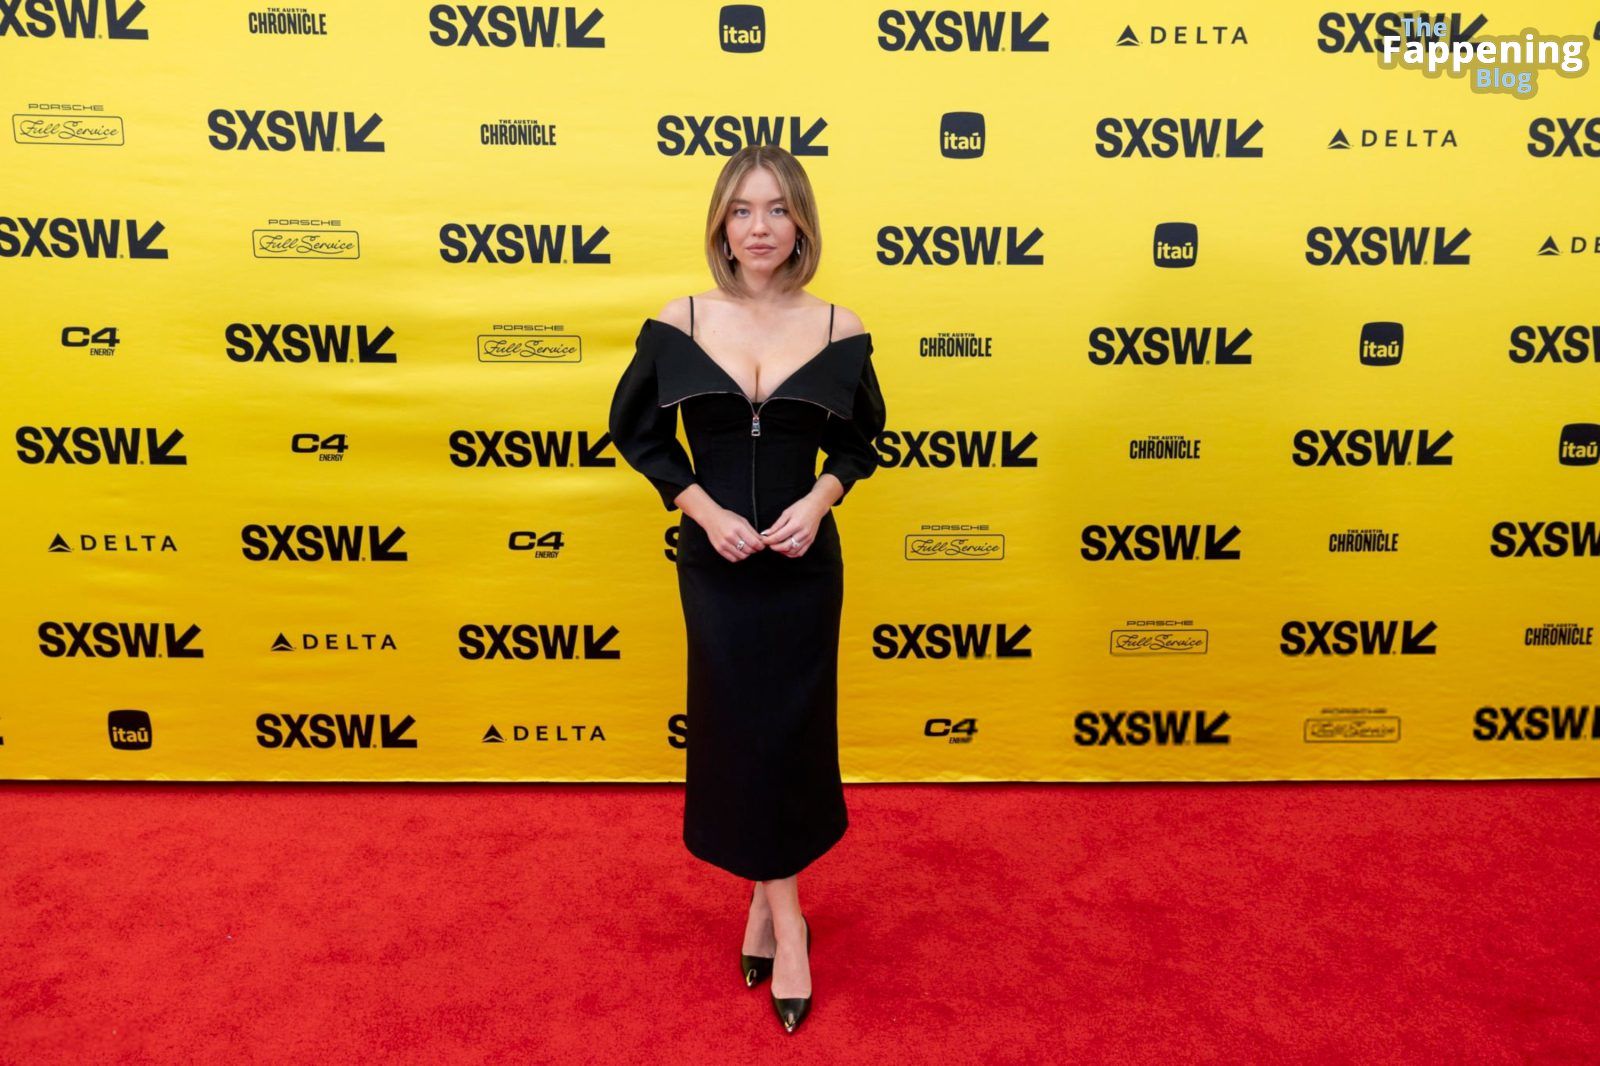 Sydney Sweeney Shows Off Her Sexy Big Boobs at SXSW (23 Photos)